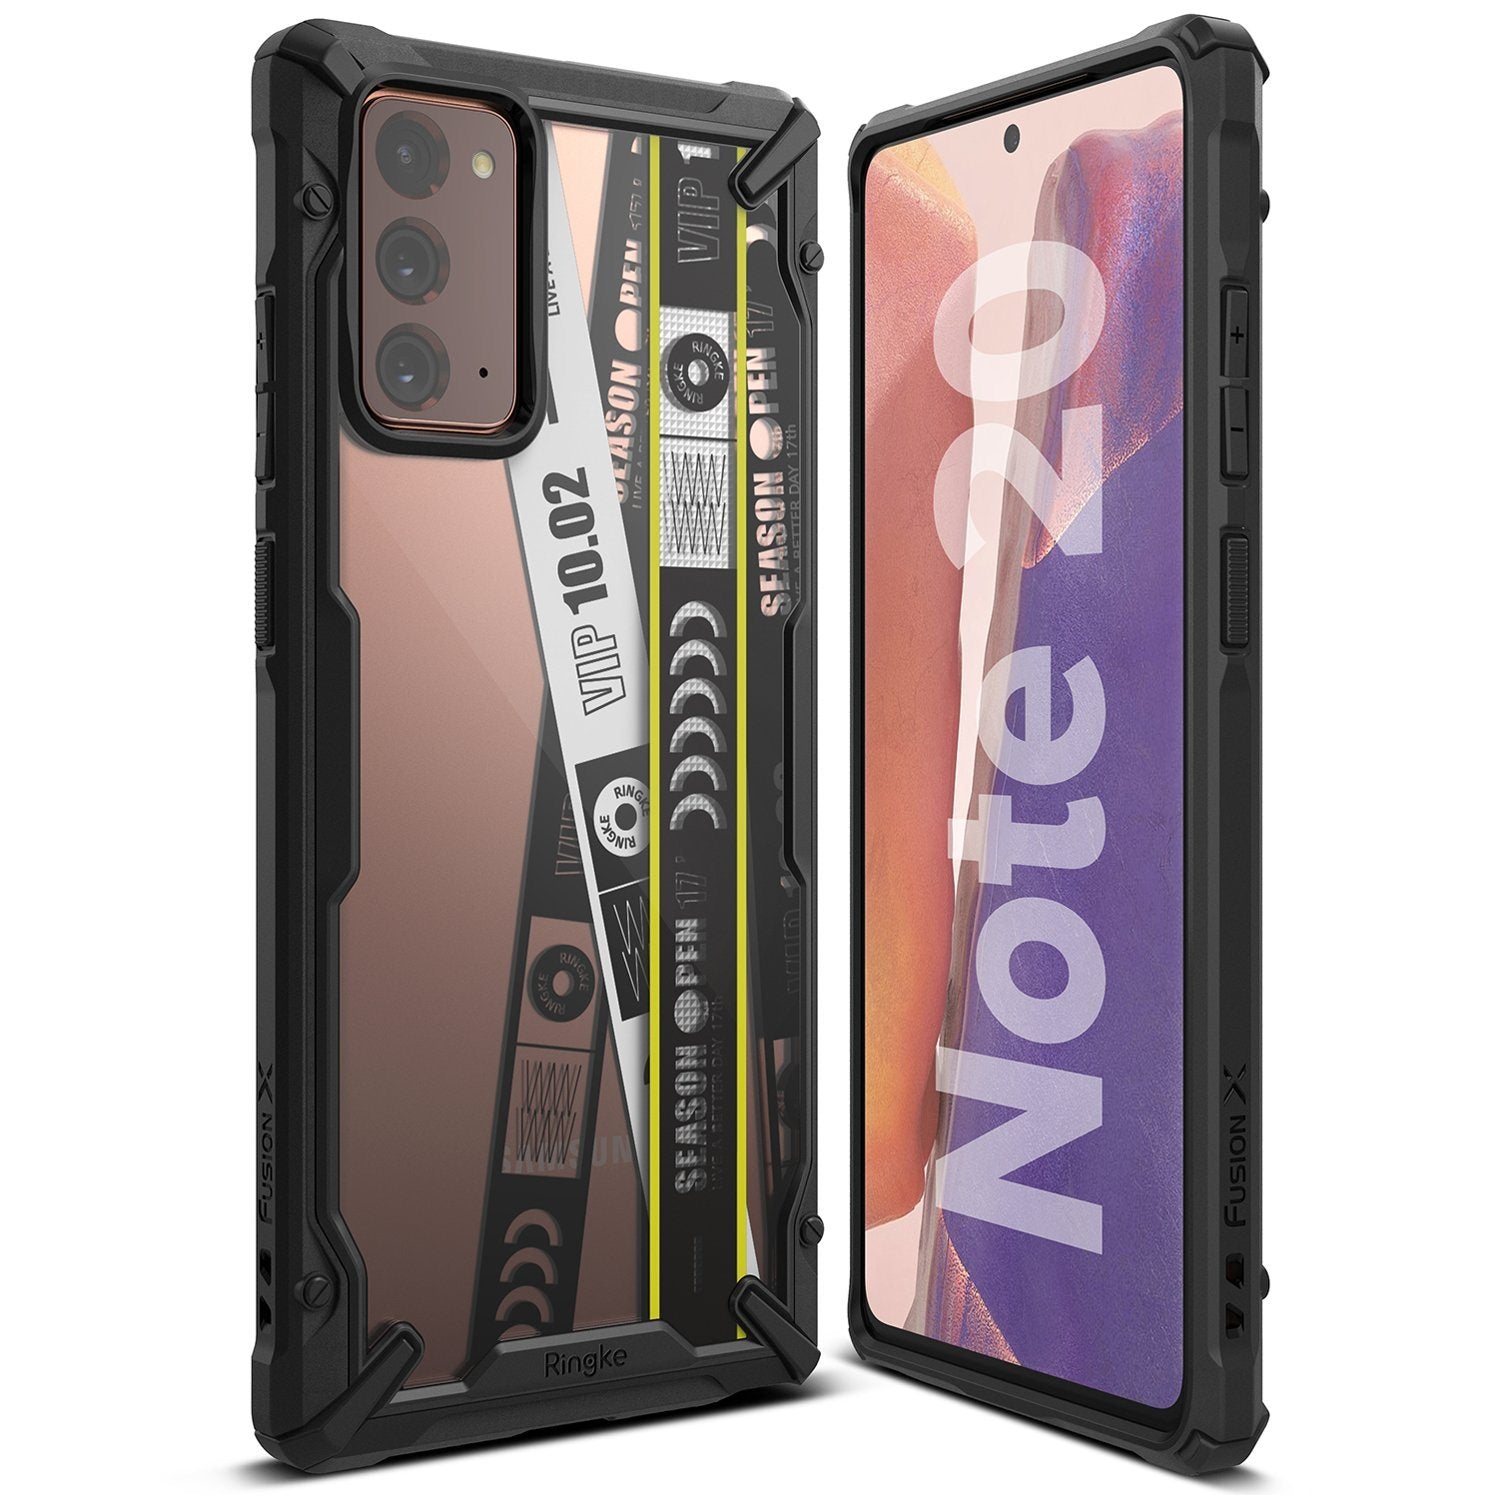 Ringke Fusion X Case for Samsung Galaxy Note 20,